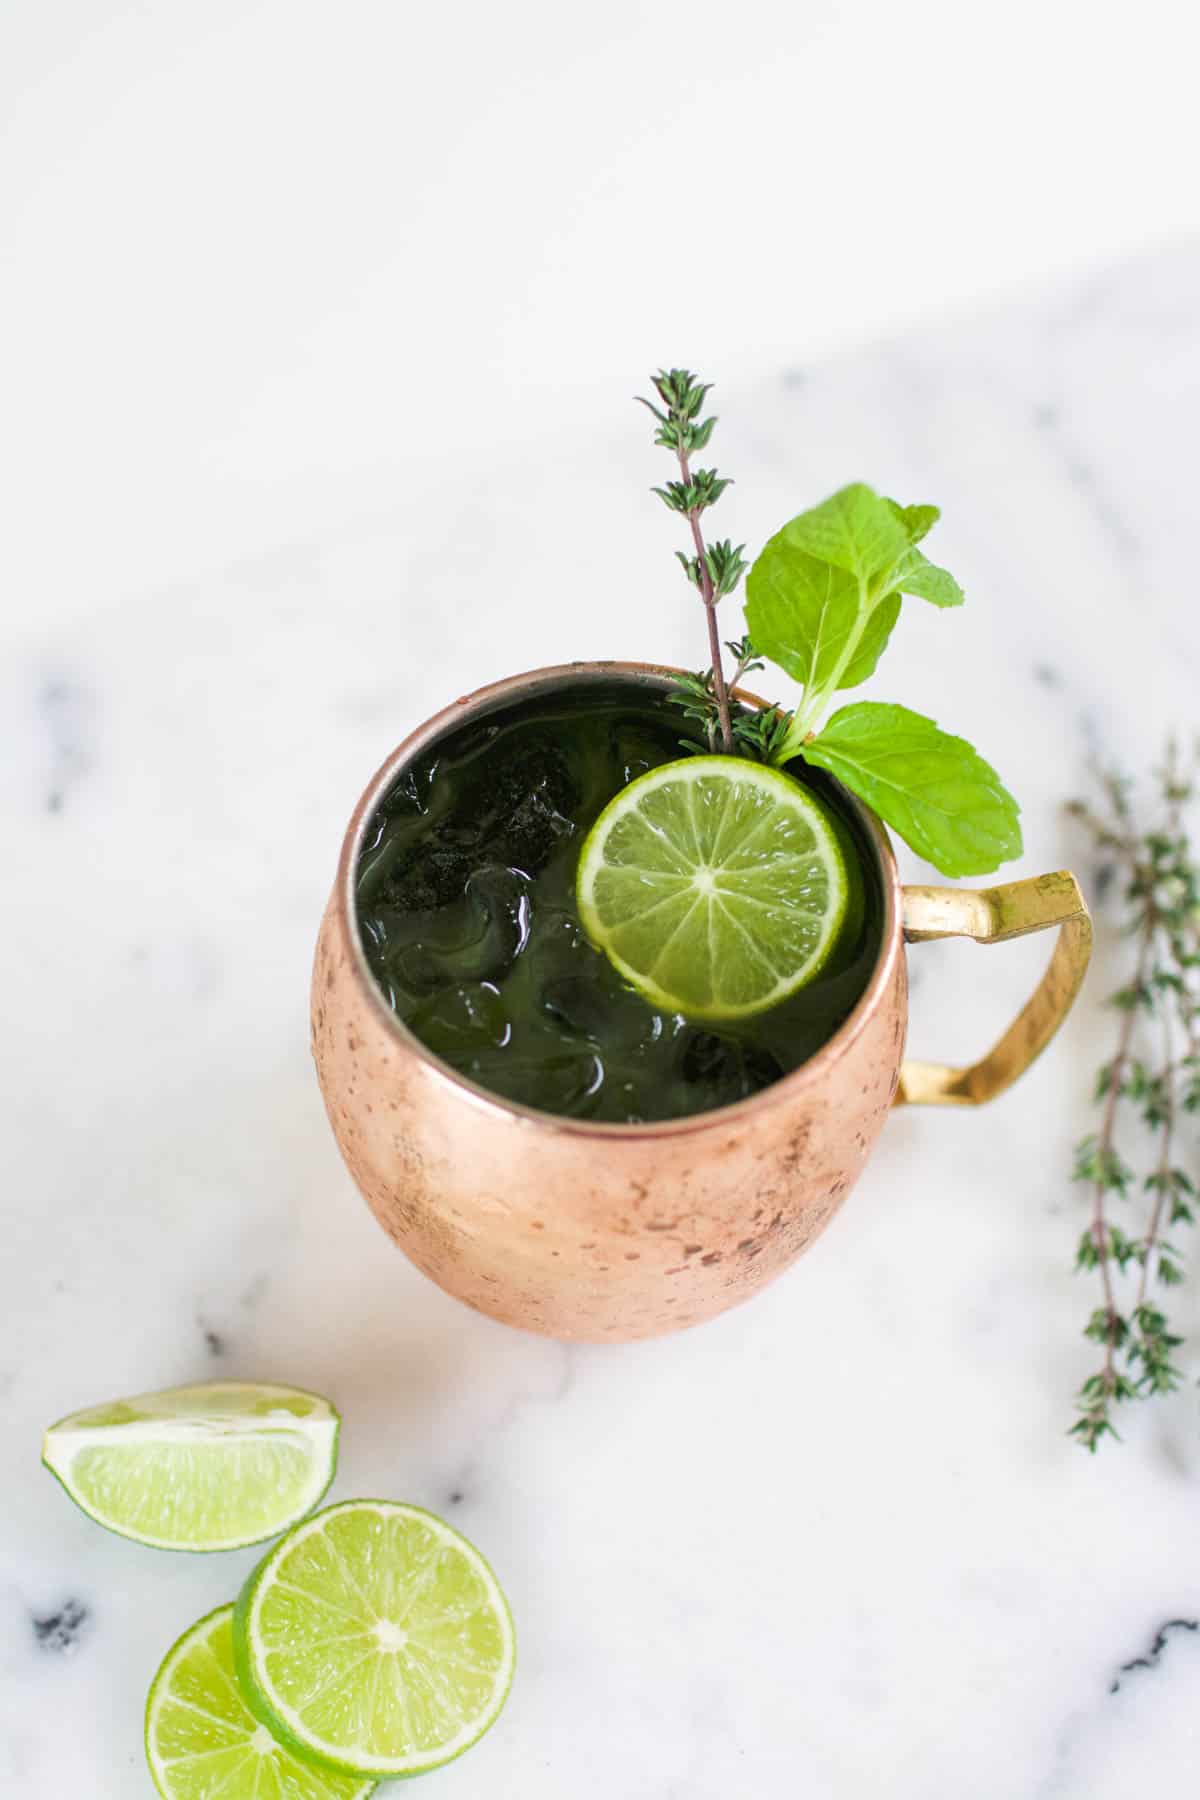 Copper Mule mug on a table holding a cocktail with limes and fresh herbs in it and around it.